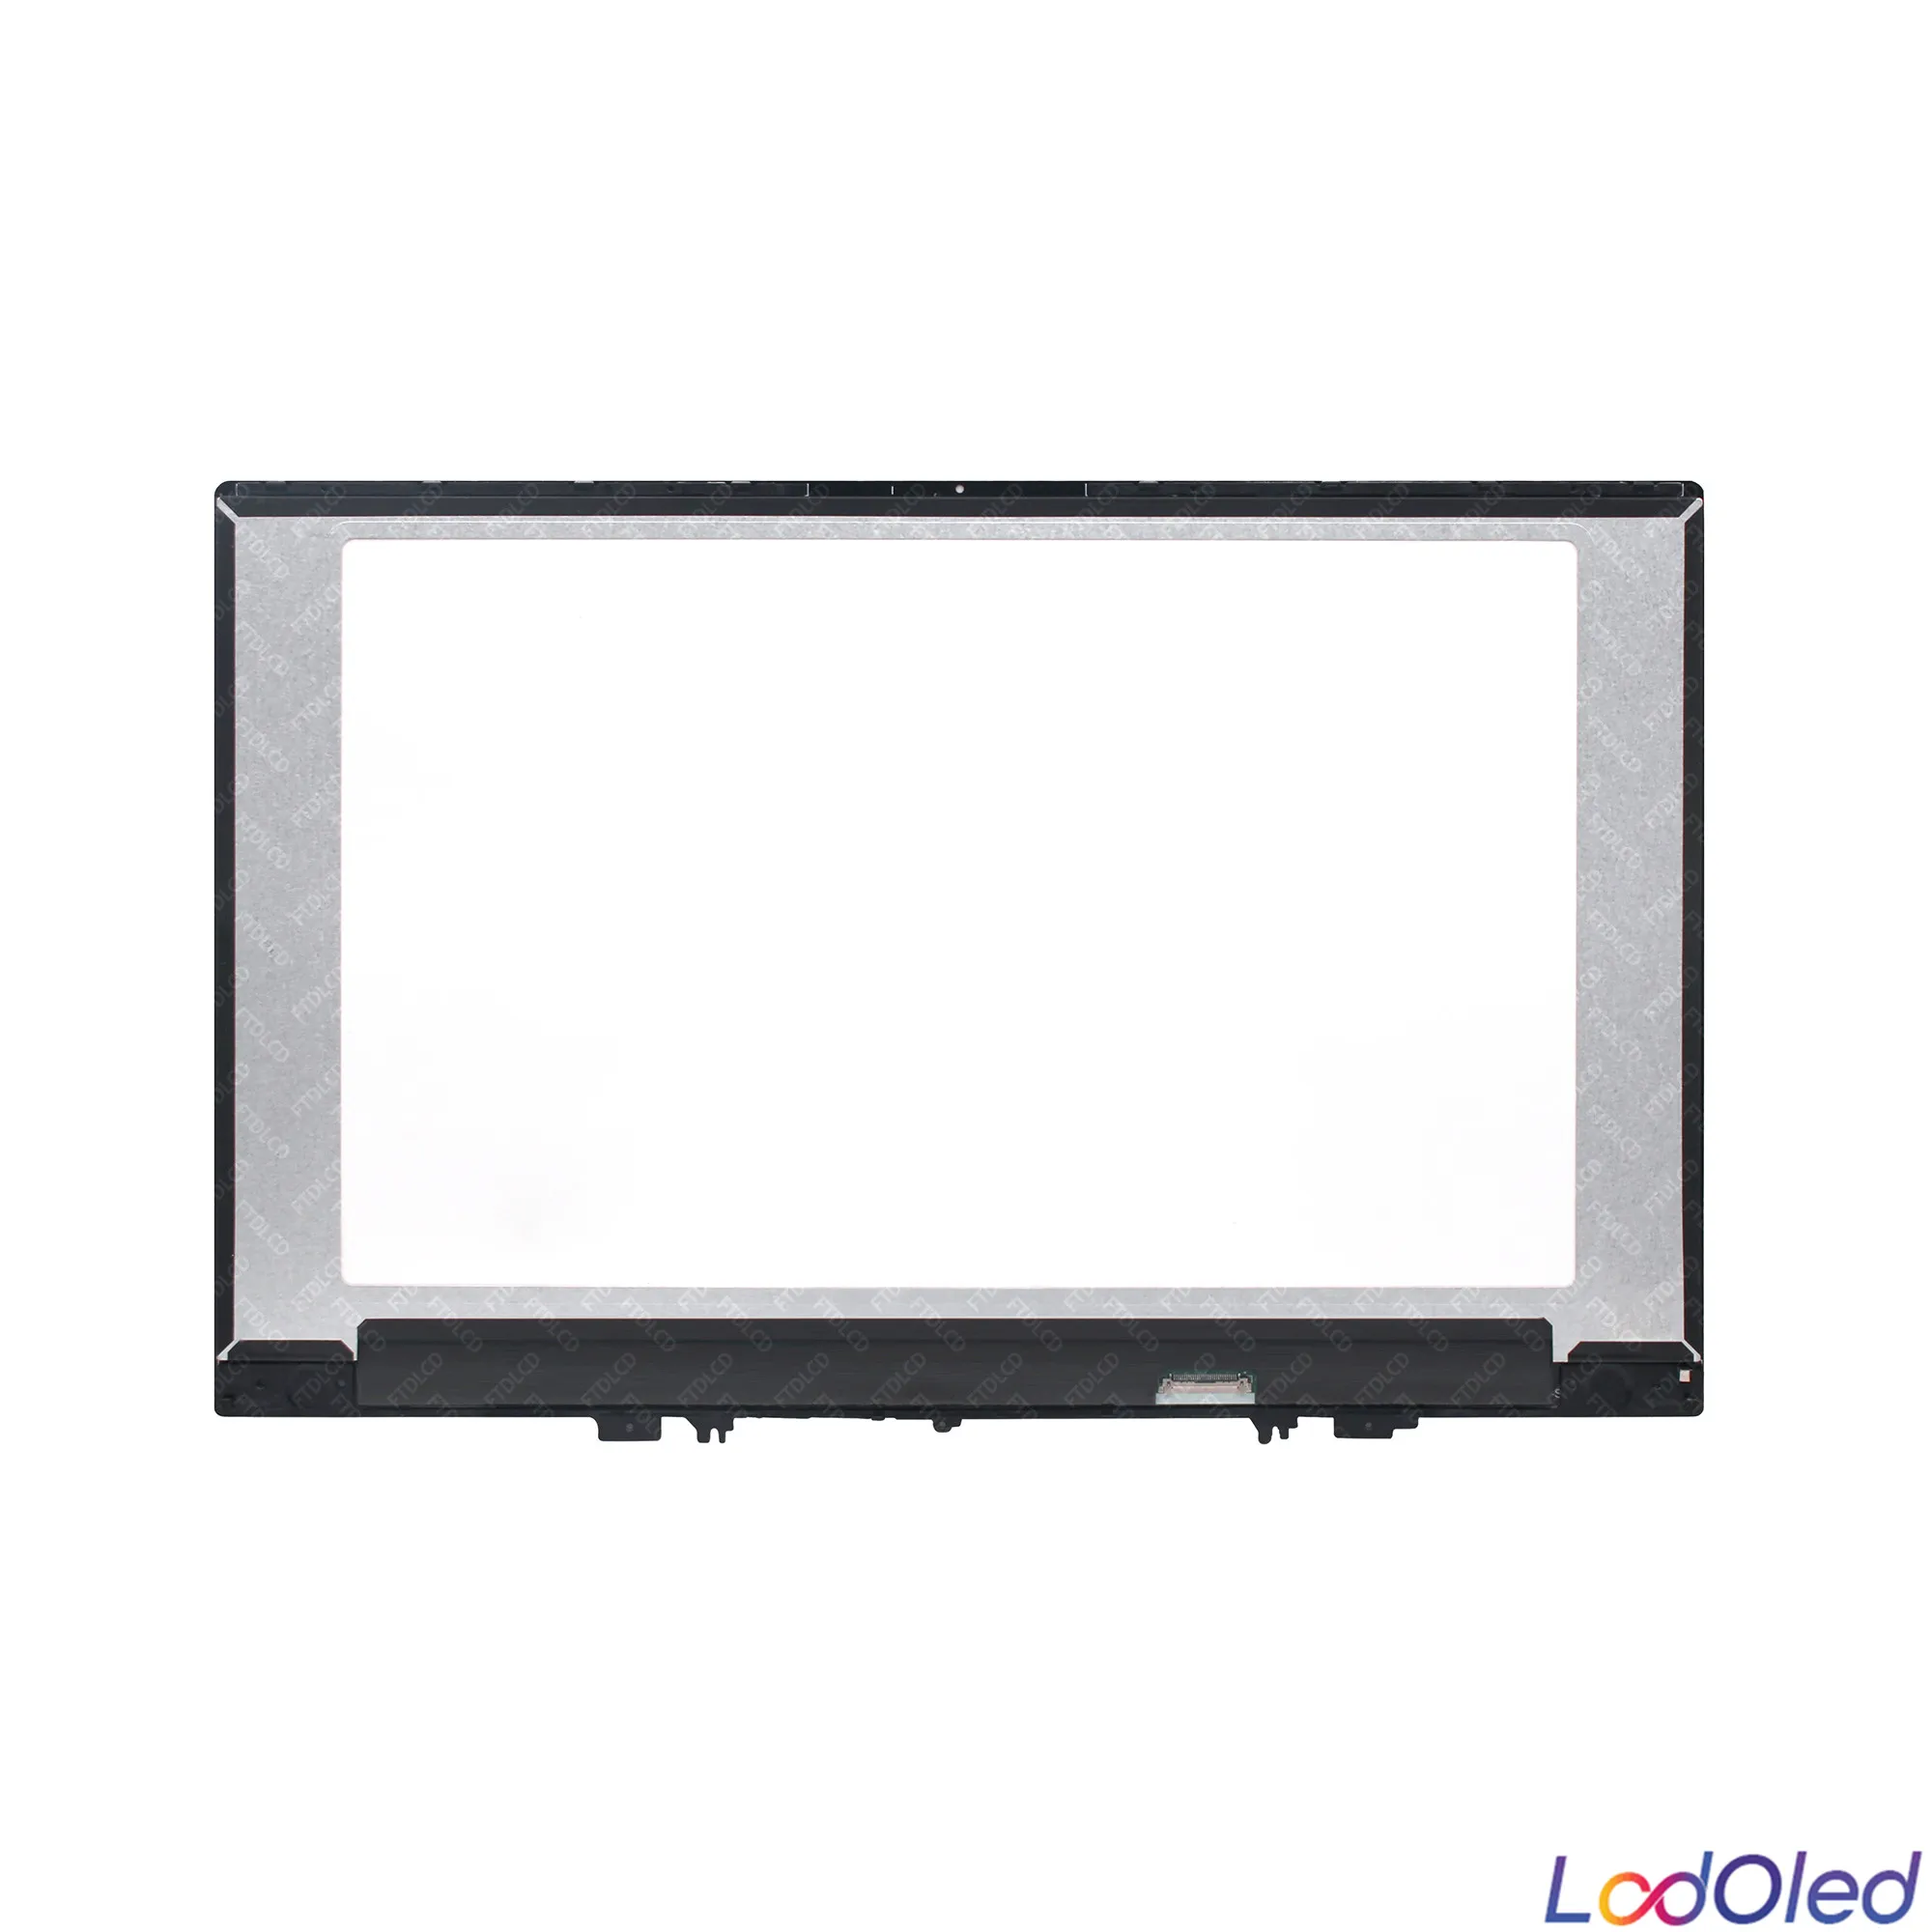 15 6 fhd ips lcd screen display panel glass assembly bezel frame n156hca eab c1 for lenovo ideapad 530s 15ikb 81ev non touch free global shipping